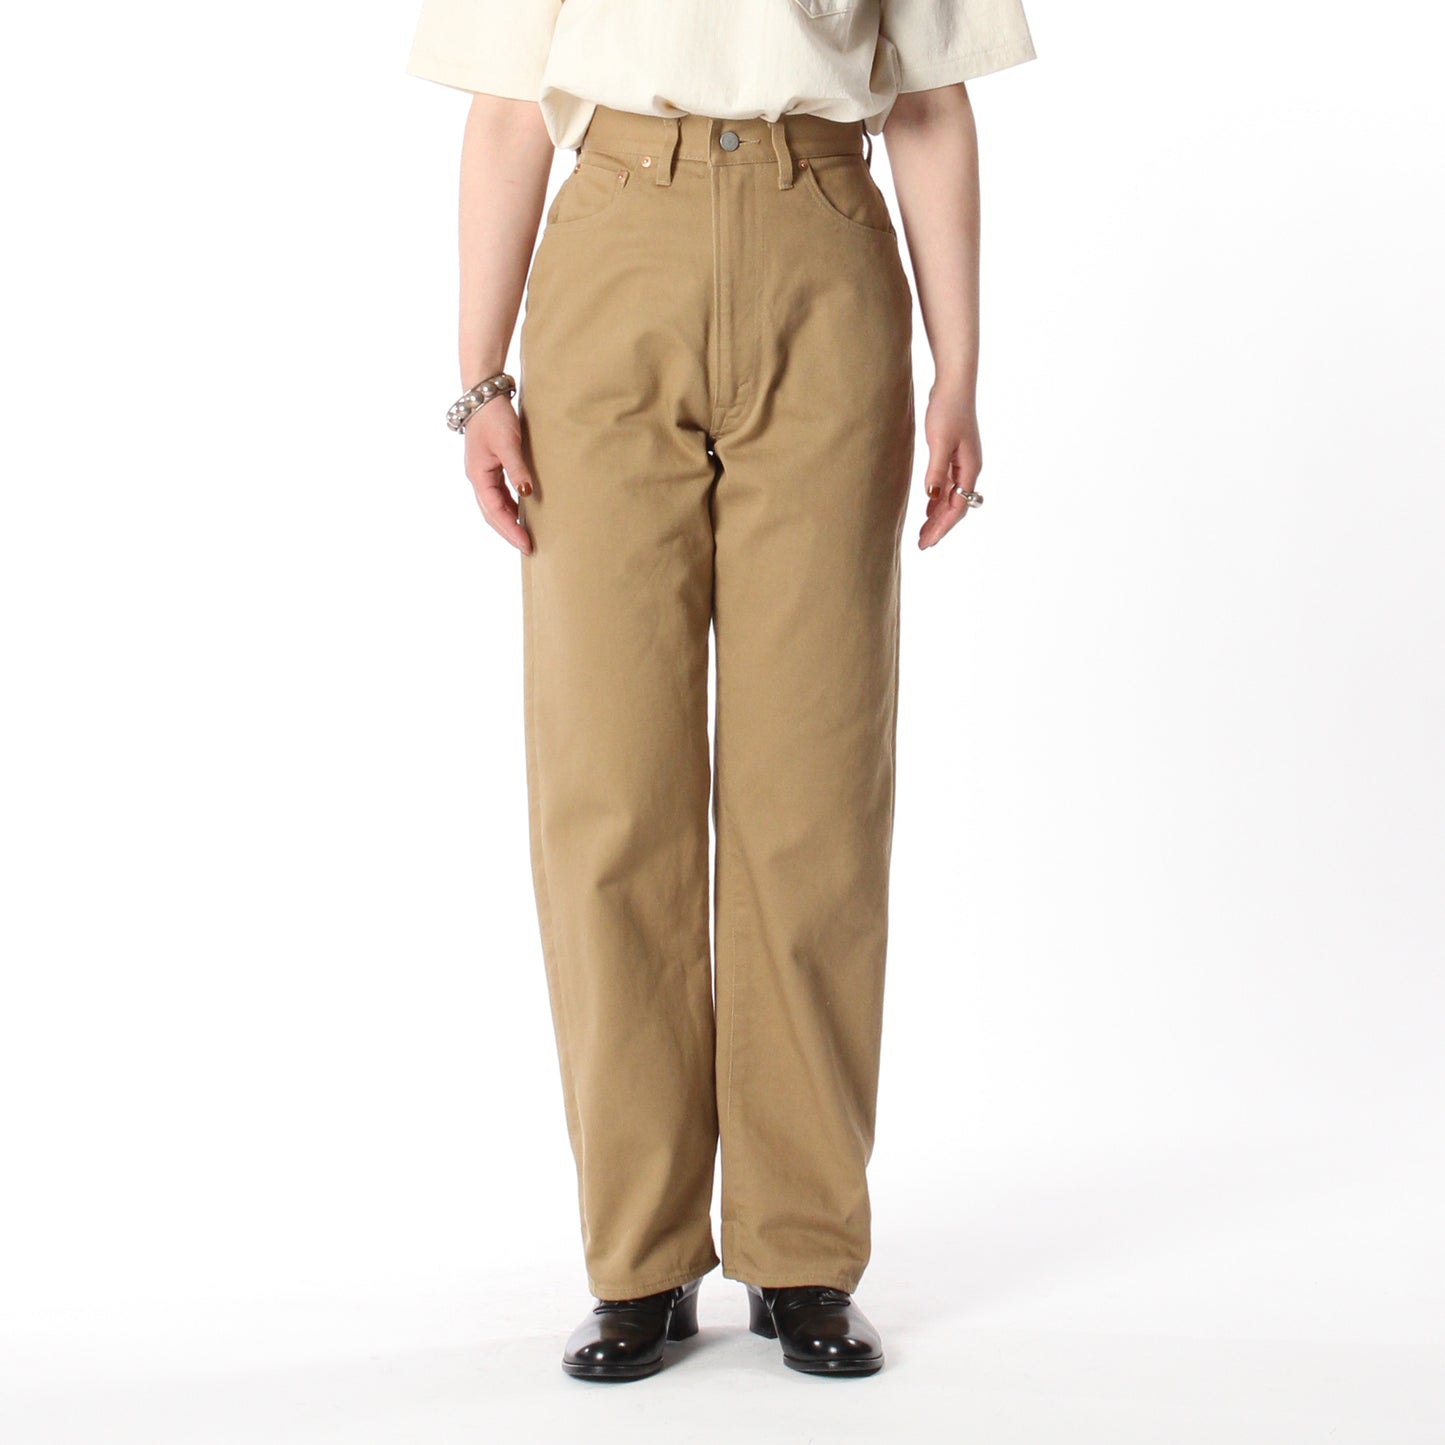 【 LADIES 】ANATOMICA 618 MARILYN DRILL / SABLE